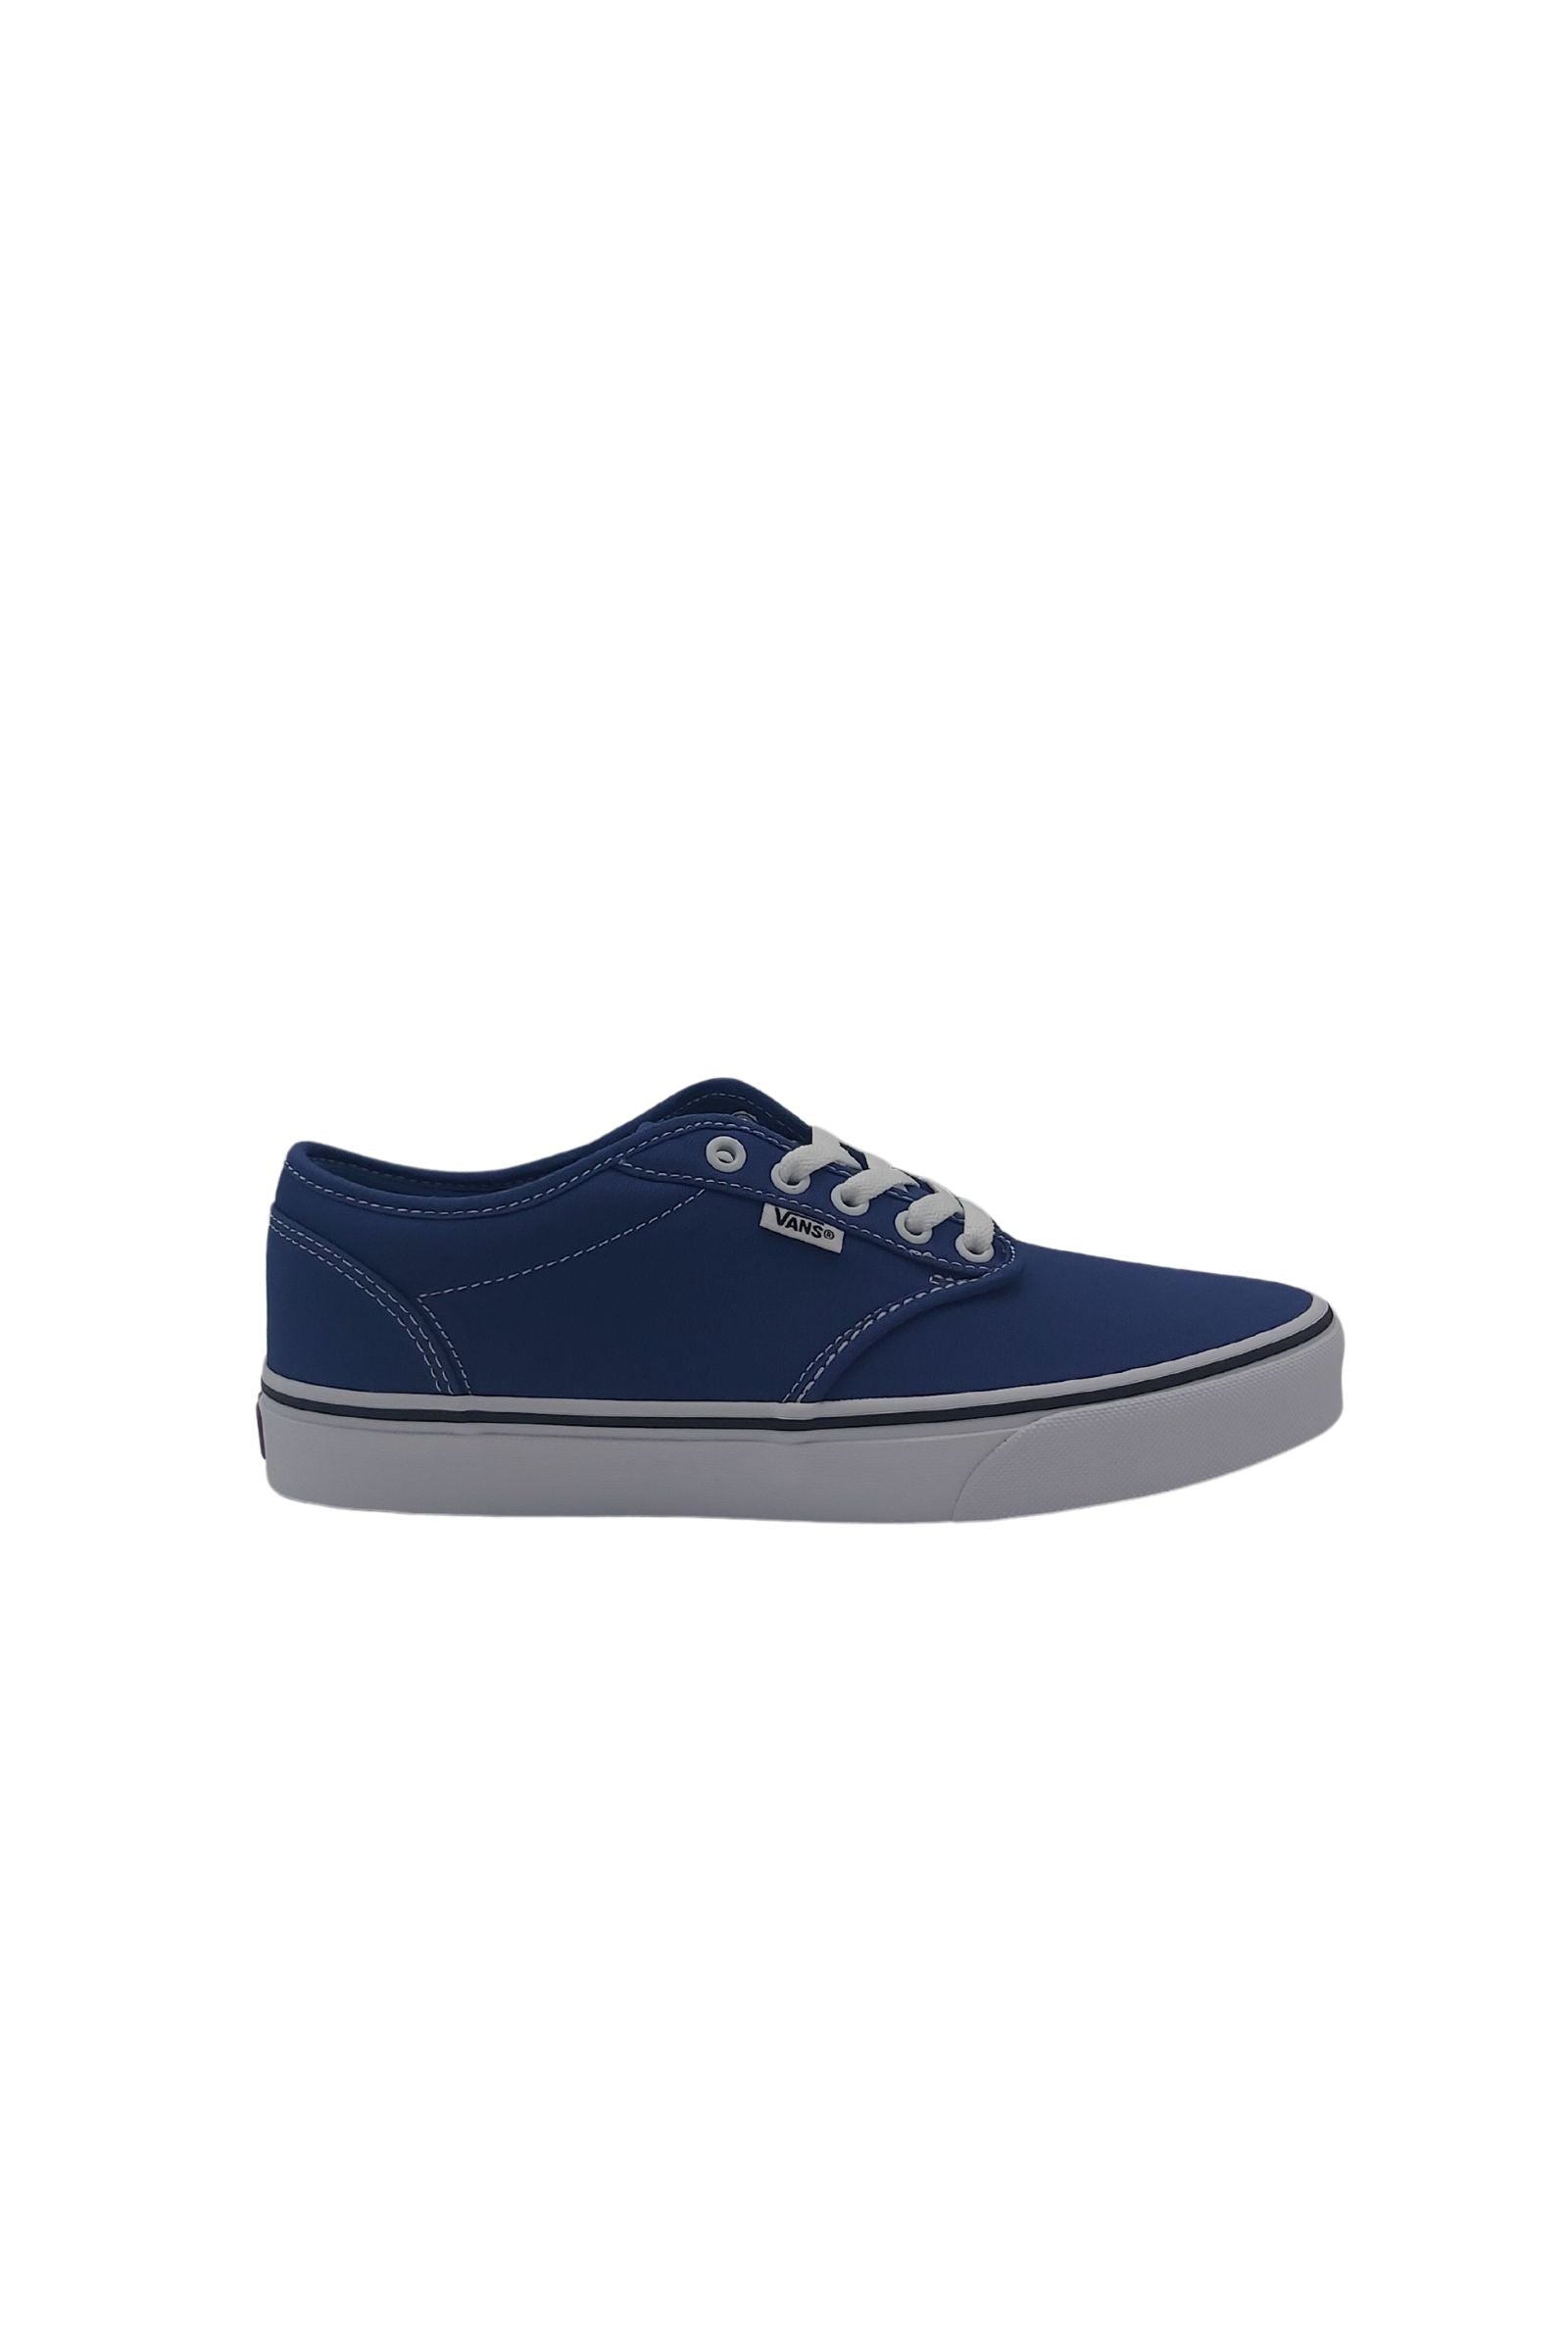 Mens Atwood Blue/White Sneaker-Side View